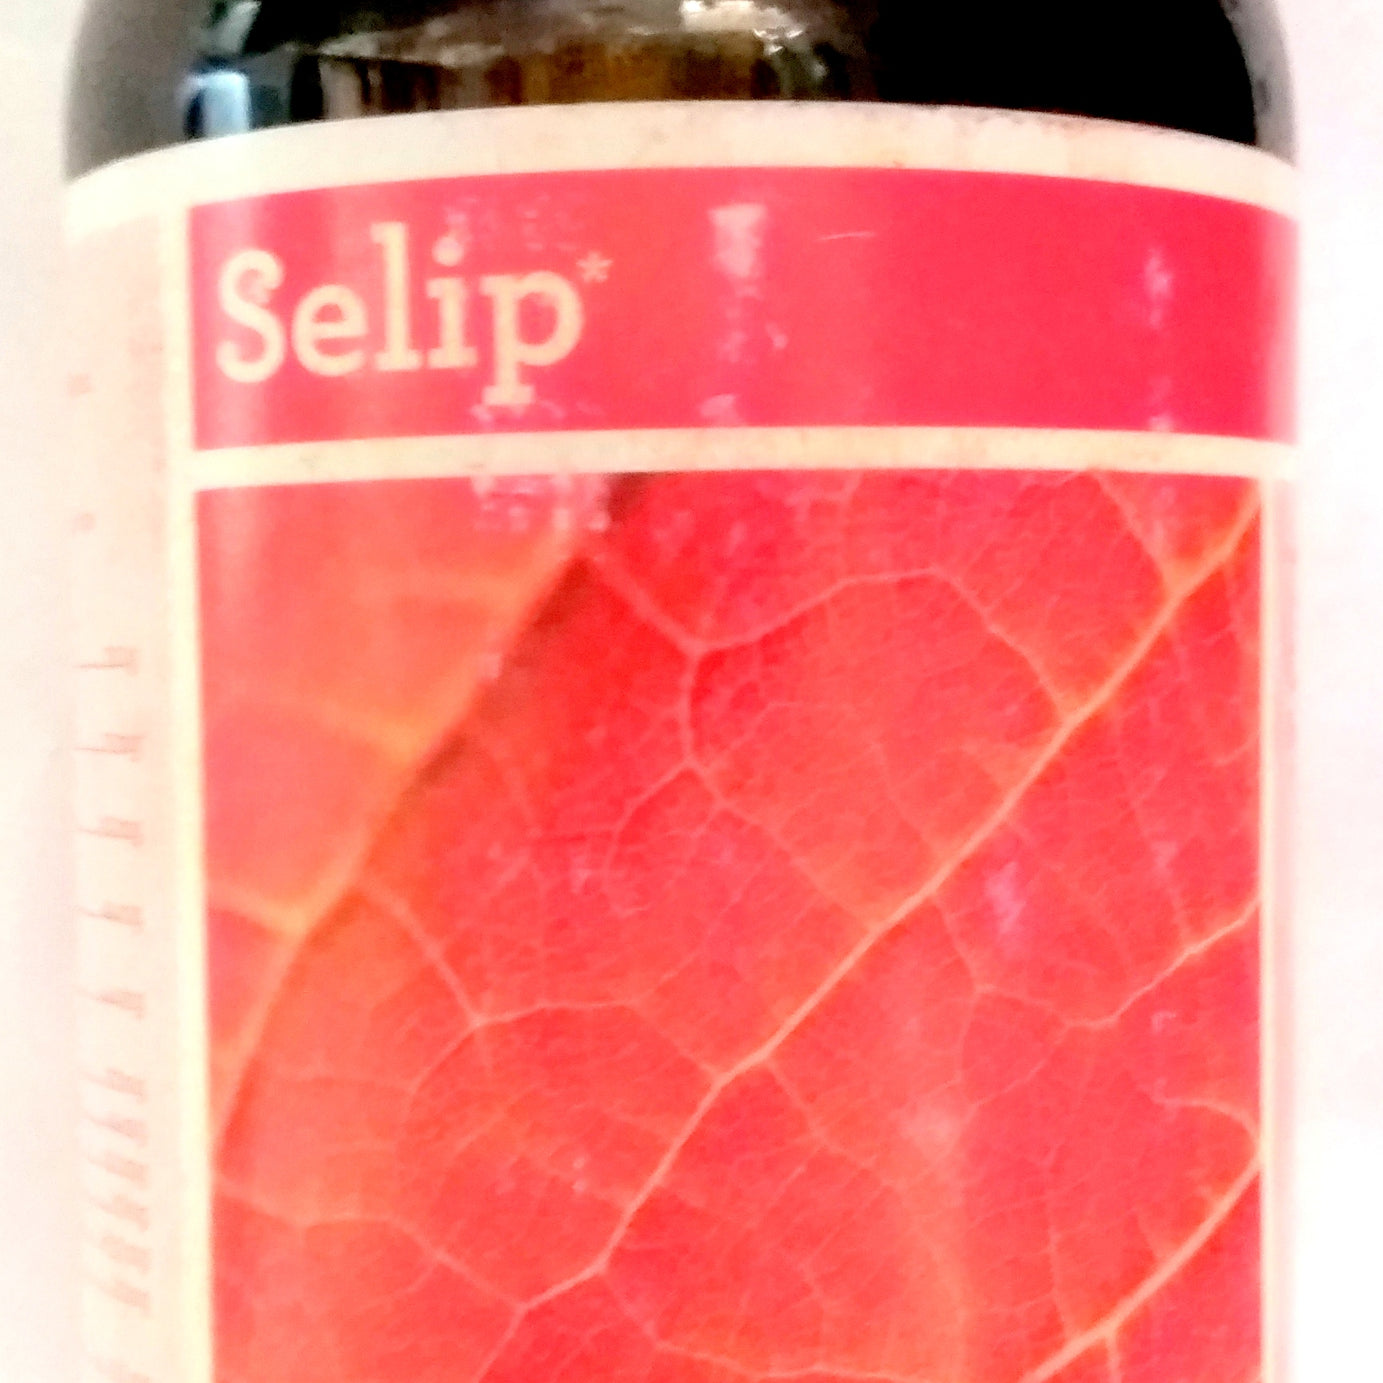 Shop Selip syrup 200ml at price 135.00 from Bipha Online - Ayush Care